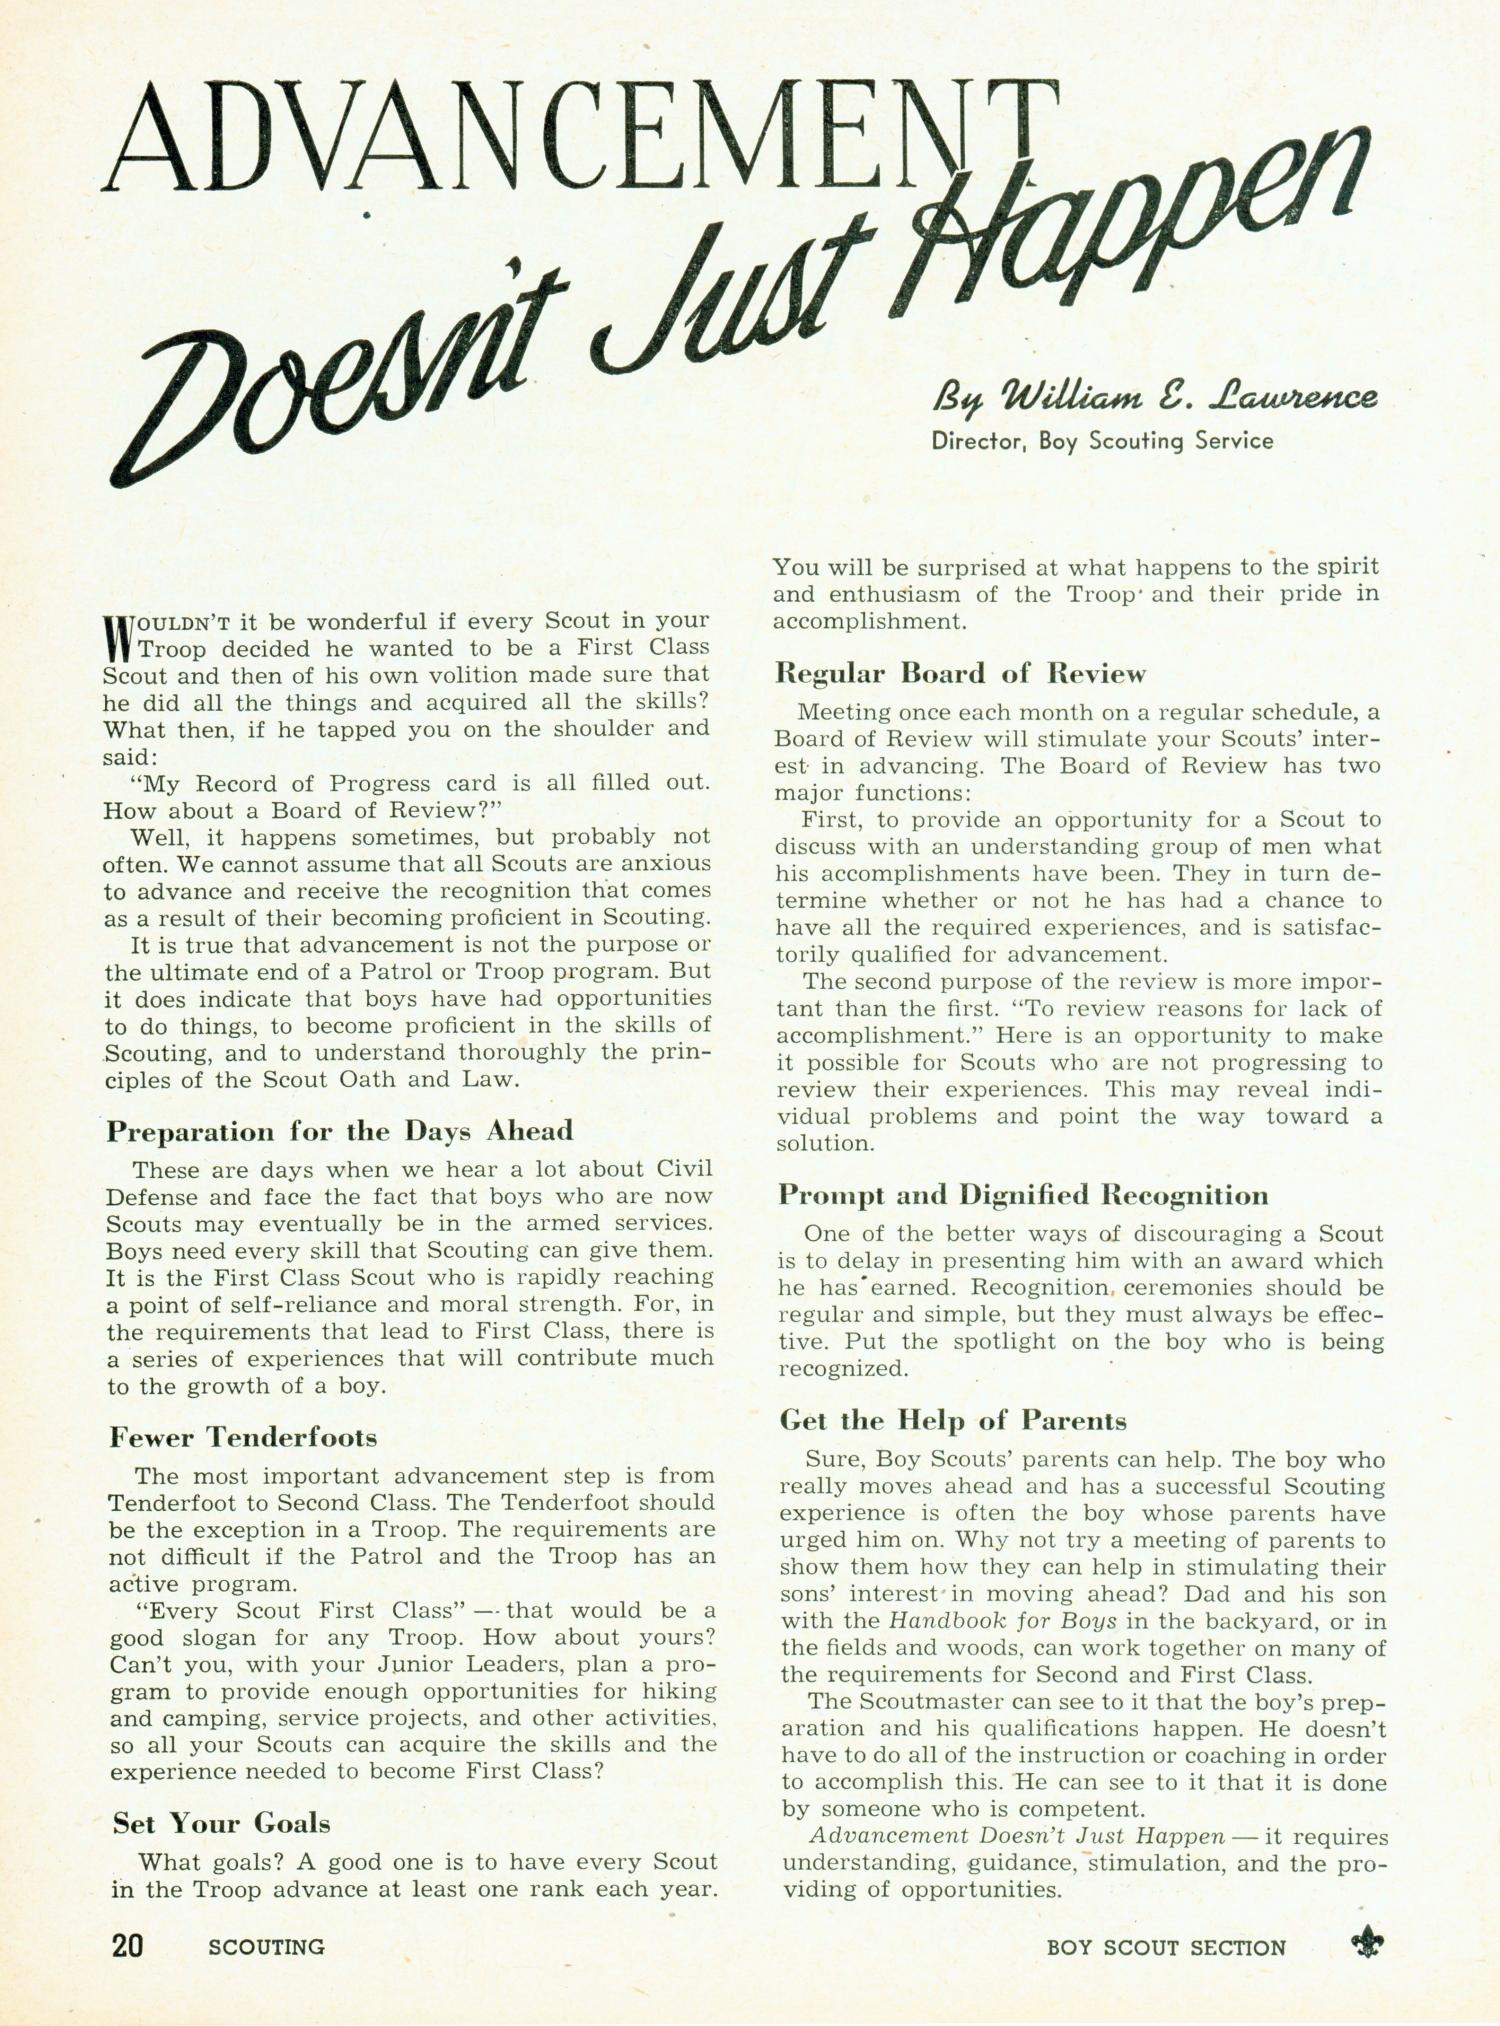 Scouting, Volume 39, Number 5, May 1951
                                                
                                                    20
                                                